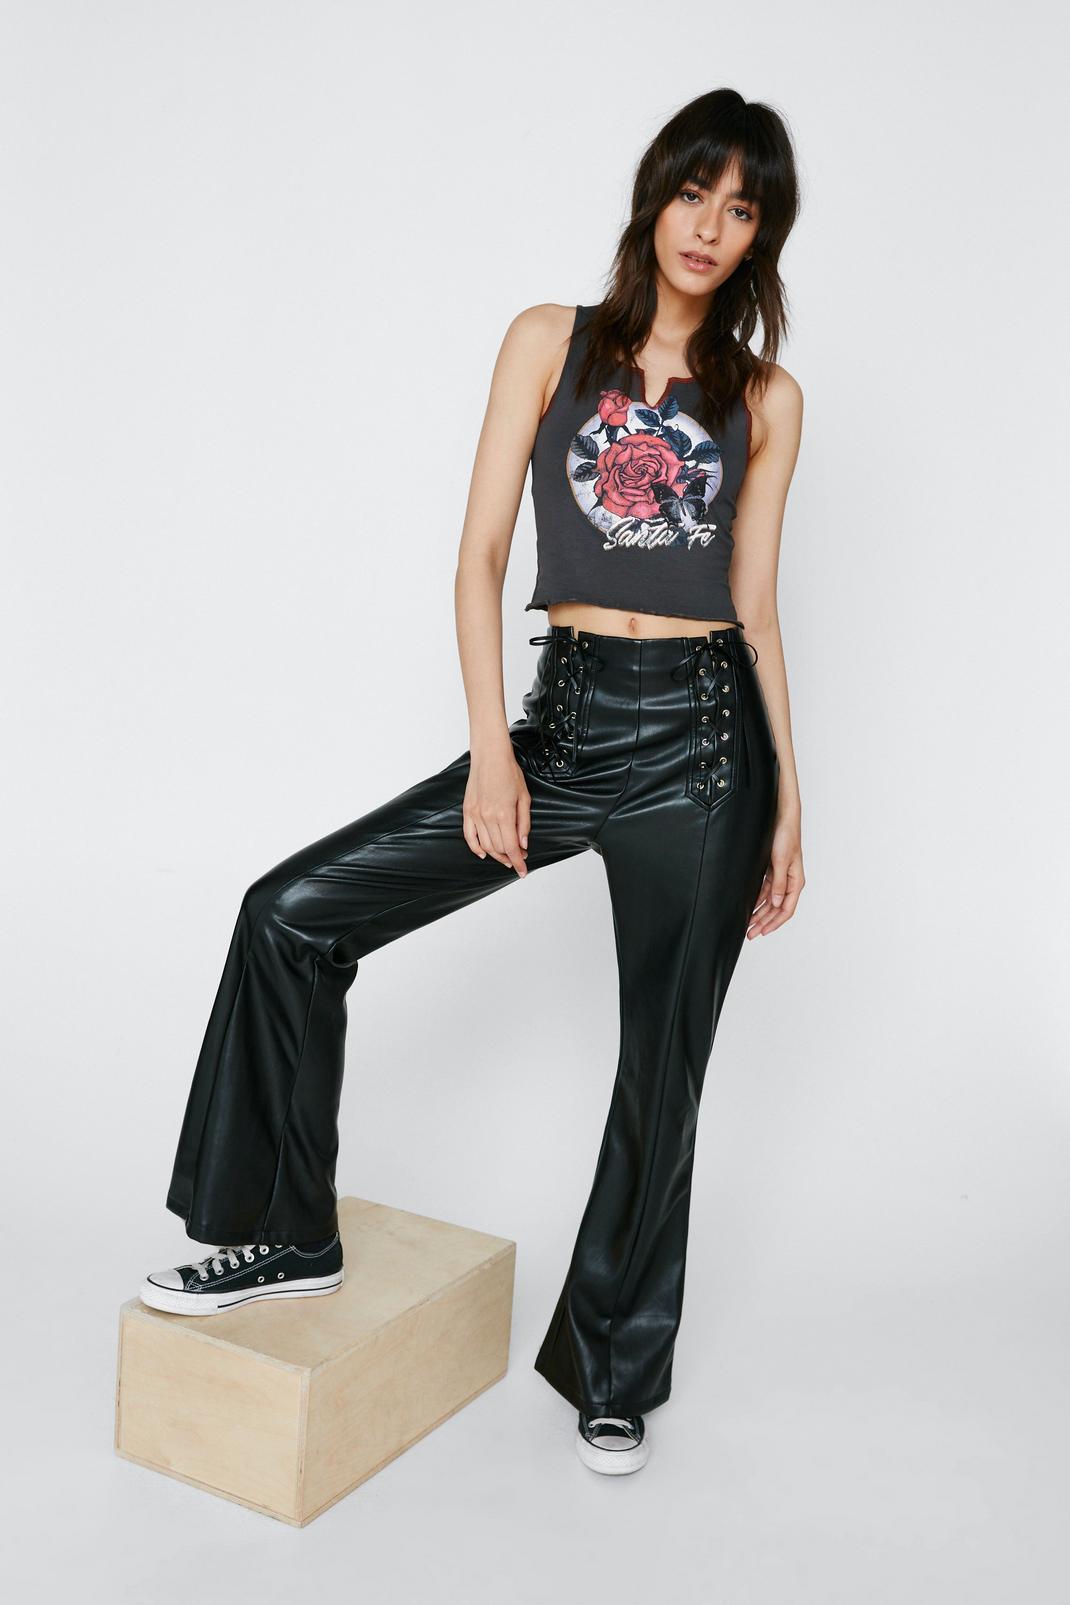 Faux Leather Lace up Crop Top, Pu Leather Crop Top, Lace up Crop